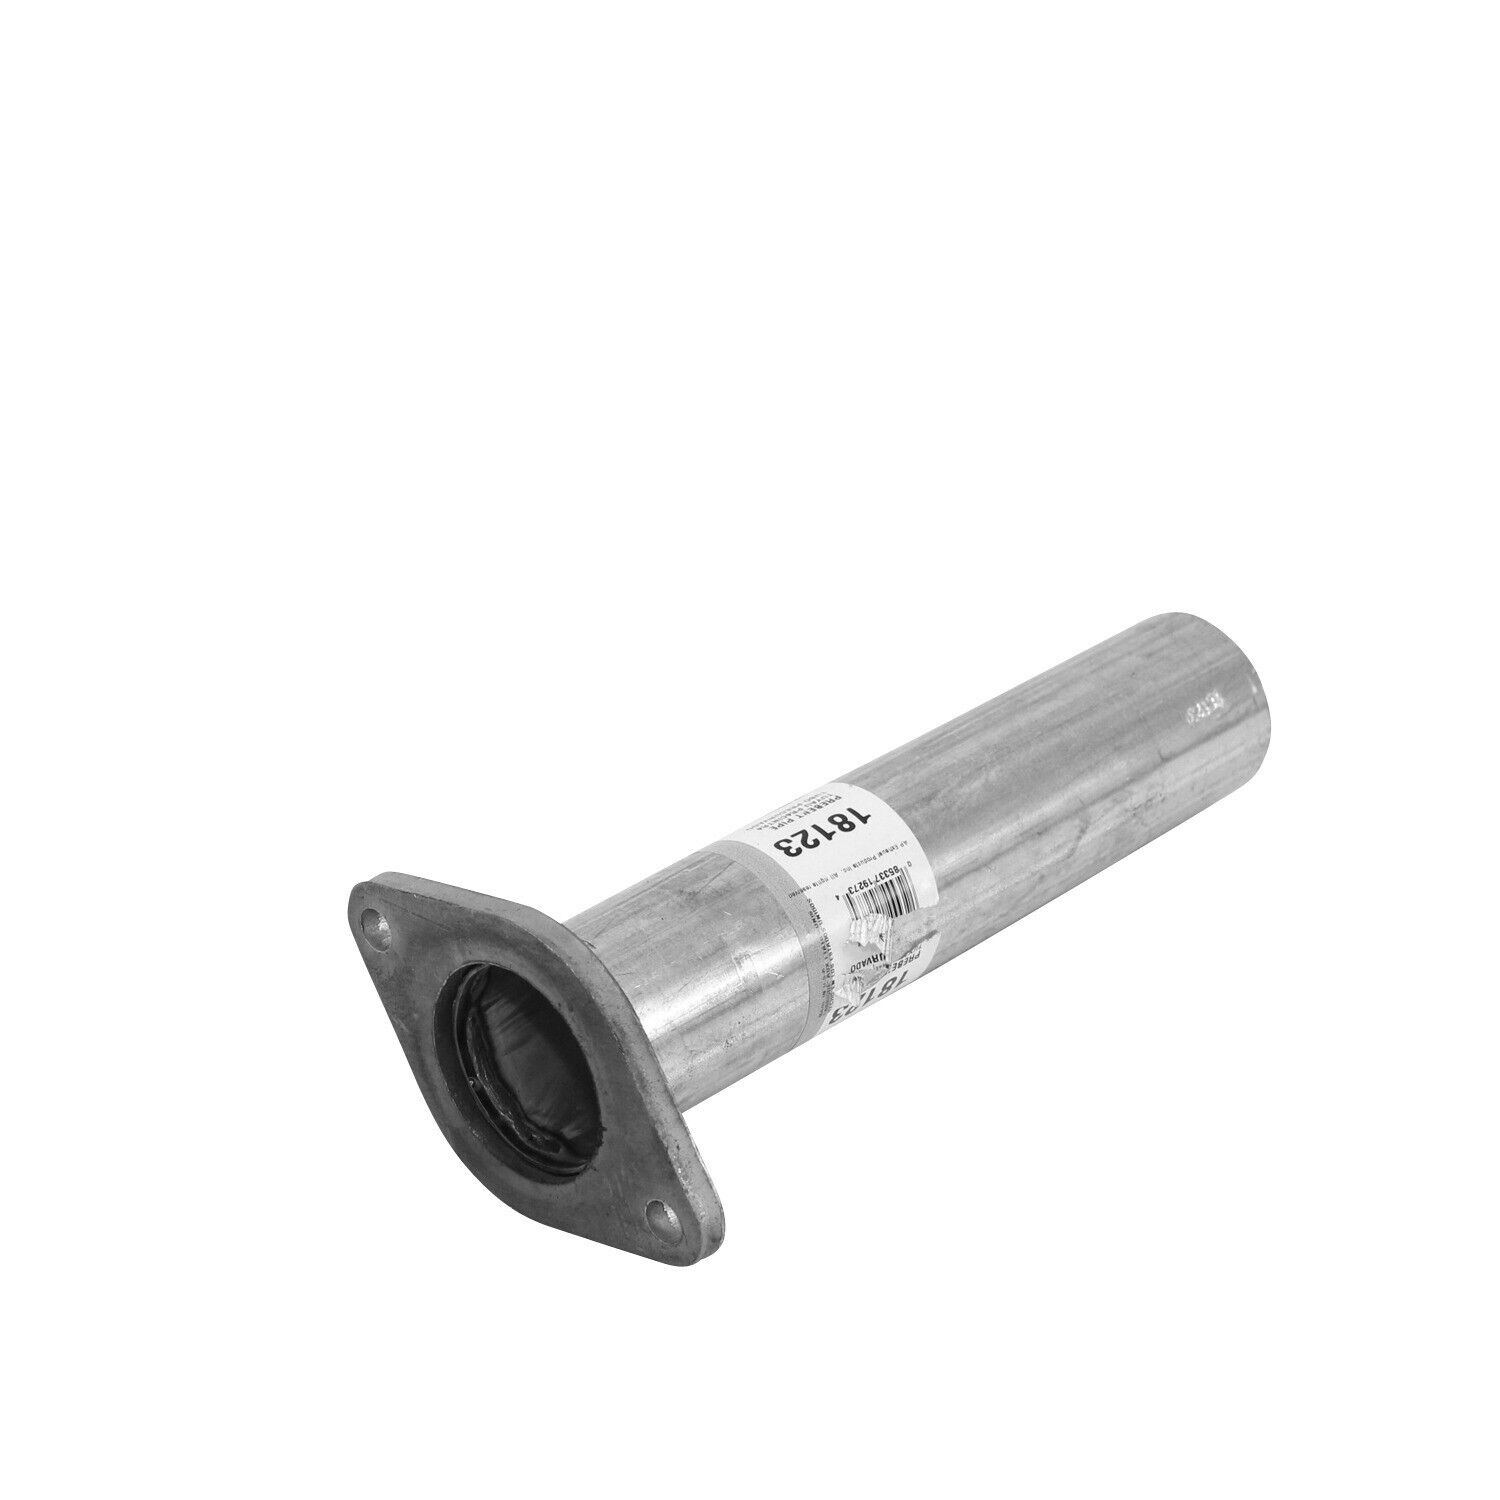 AP Exhaust Exhaust Pipe for Venture, Silhouette, Montana, Trans Sport 18123